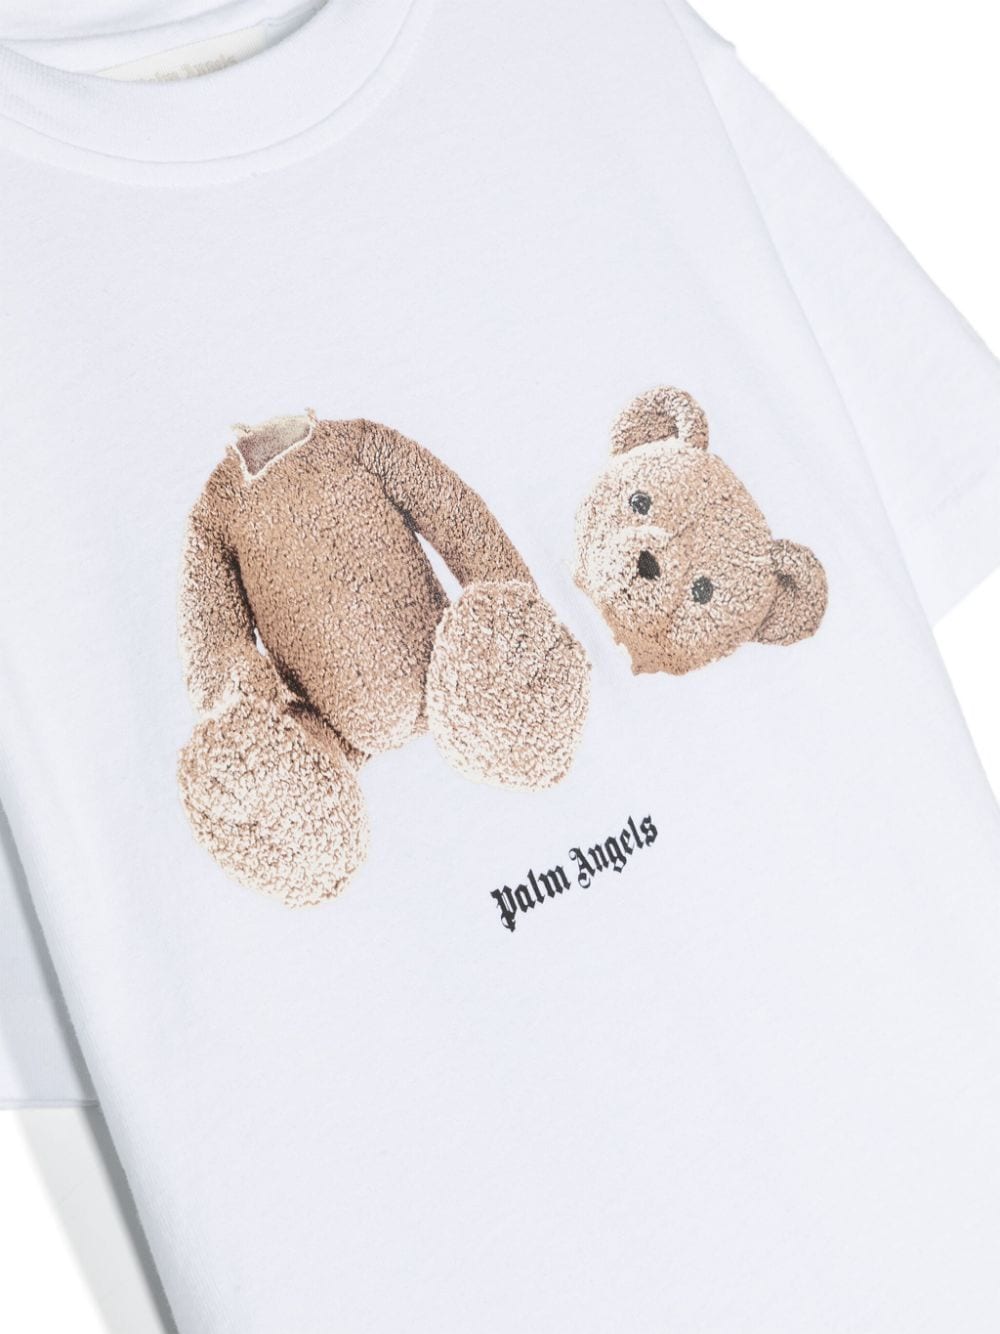 White t-shirt for boys with bear print